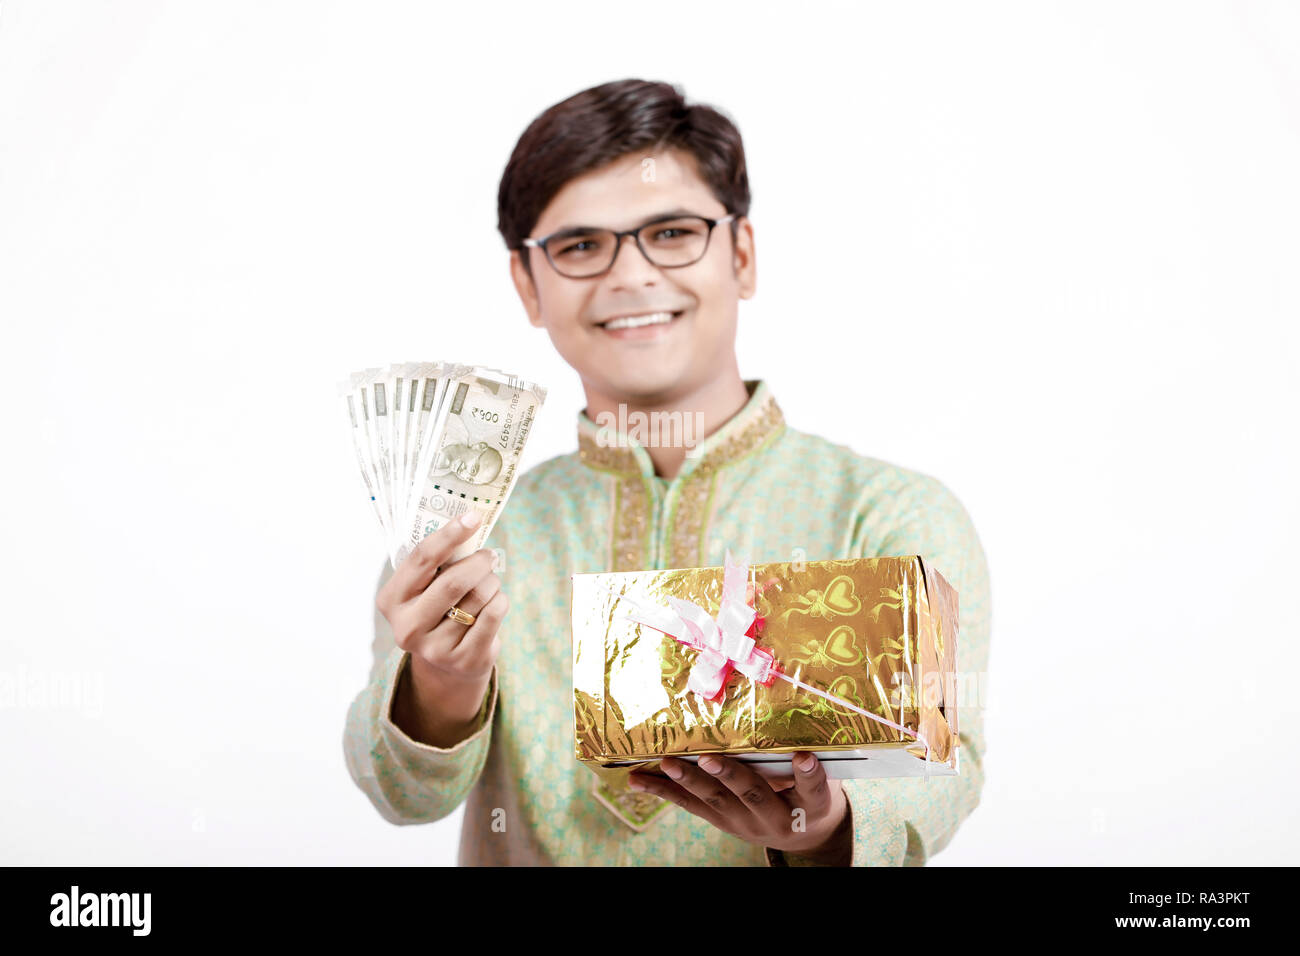 Indian man holding Indian currency note and gift in hand Stock Photo